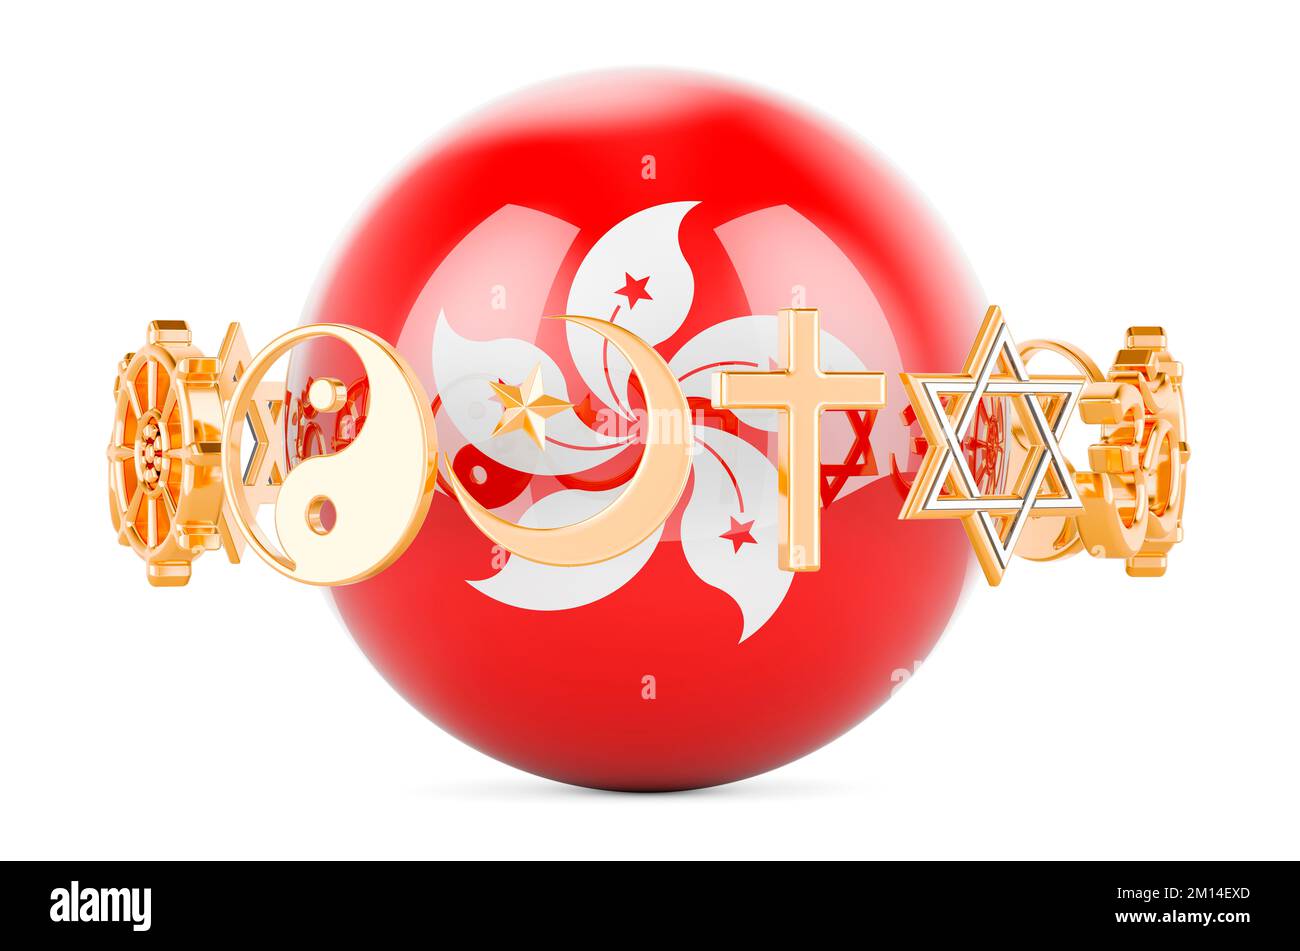 Hong Kong flag painted on sphere with religions symbols around, 3D rendering isolated on white background Stock Photo